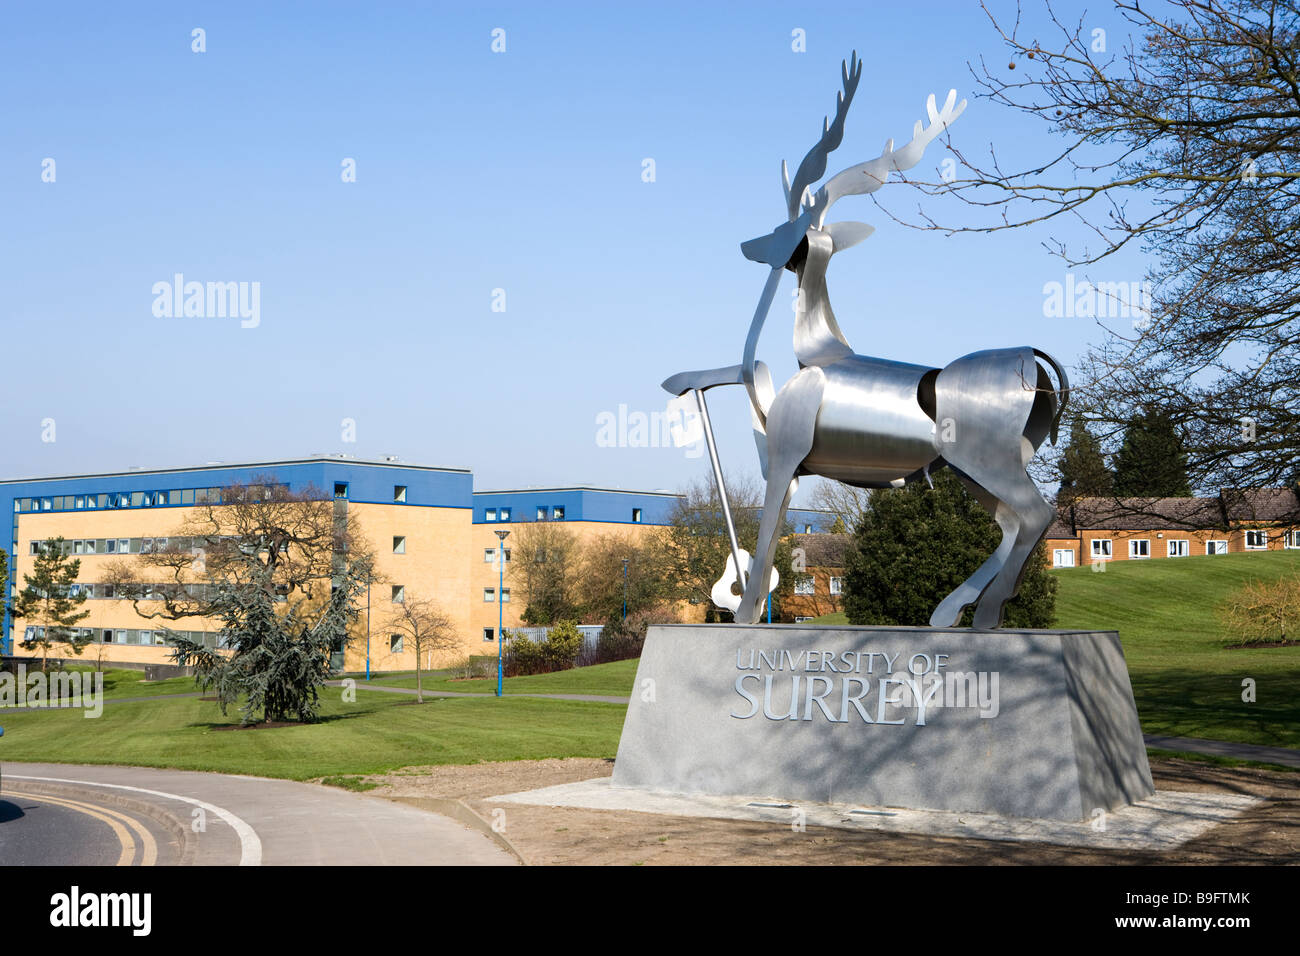 Stag sculpture at entrance to University of Surrey, Guildford, Surrey, UK Stock Photo